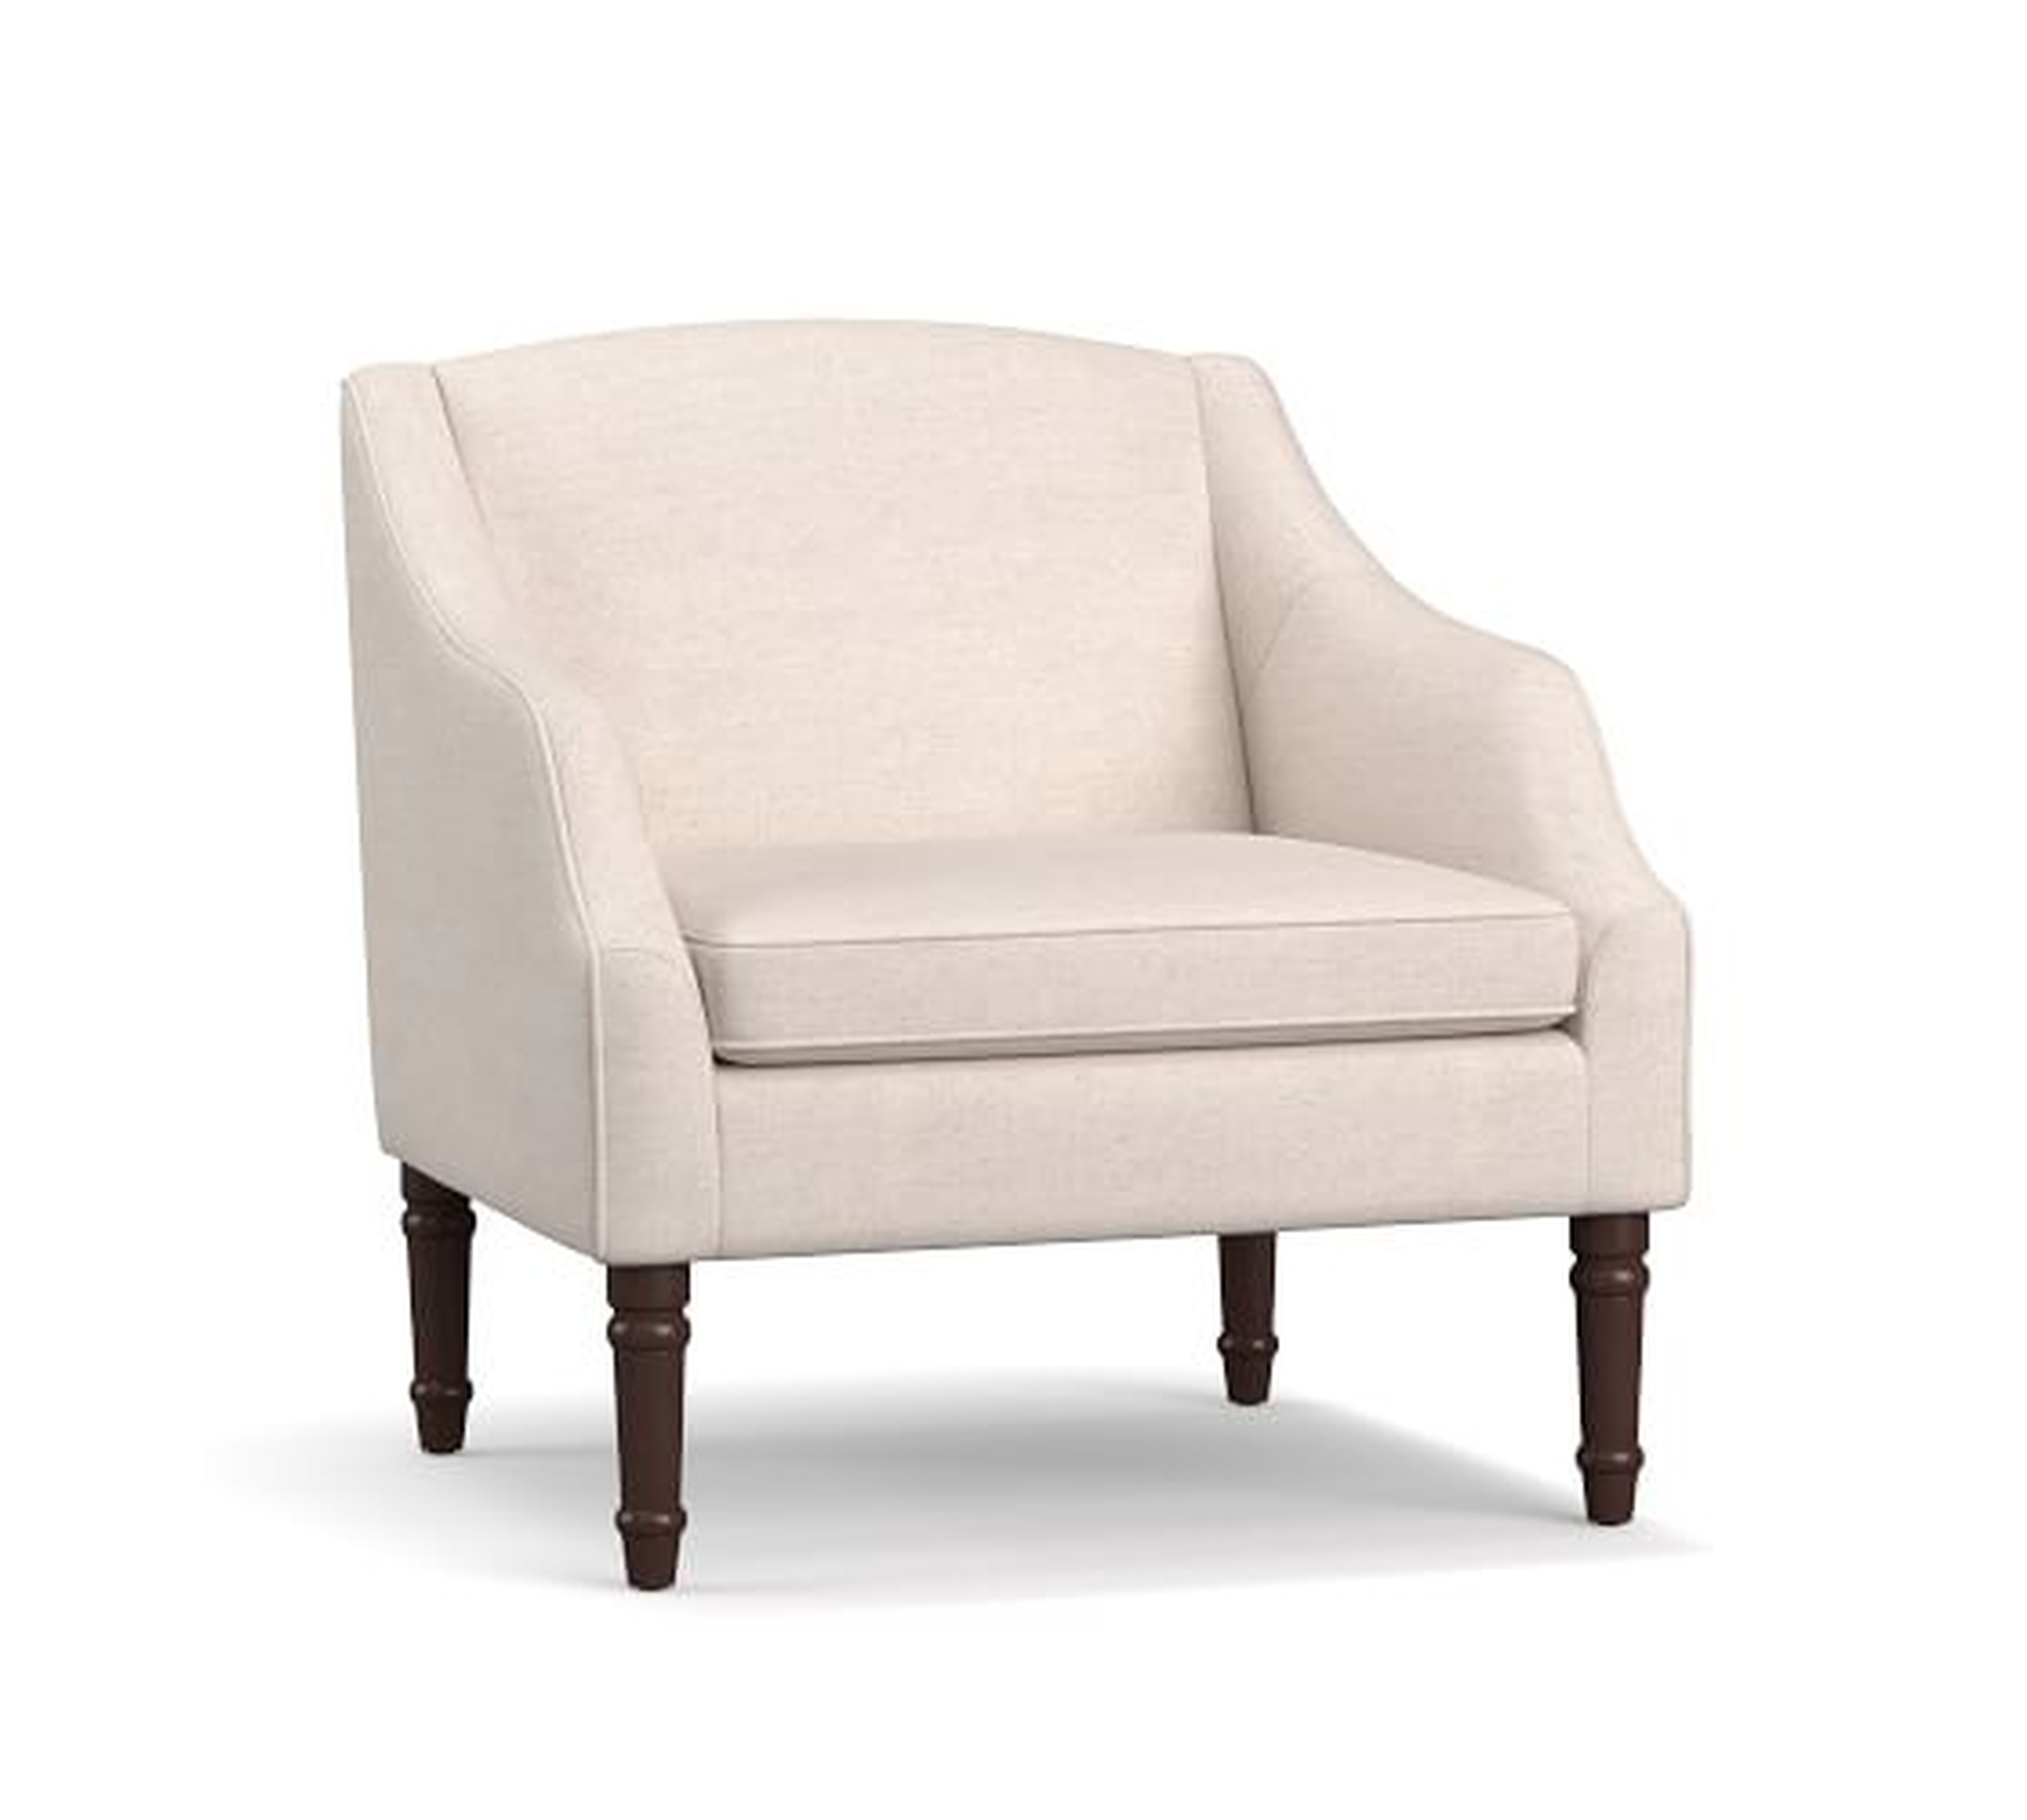 SoMa Emma Upholstered Armchair, Polyester Wrapped Cushions, Brushed Crossweave Natural - Pottery Barn